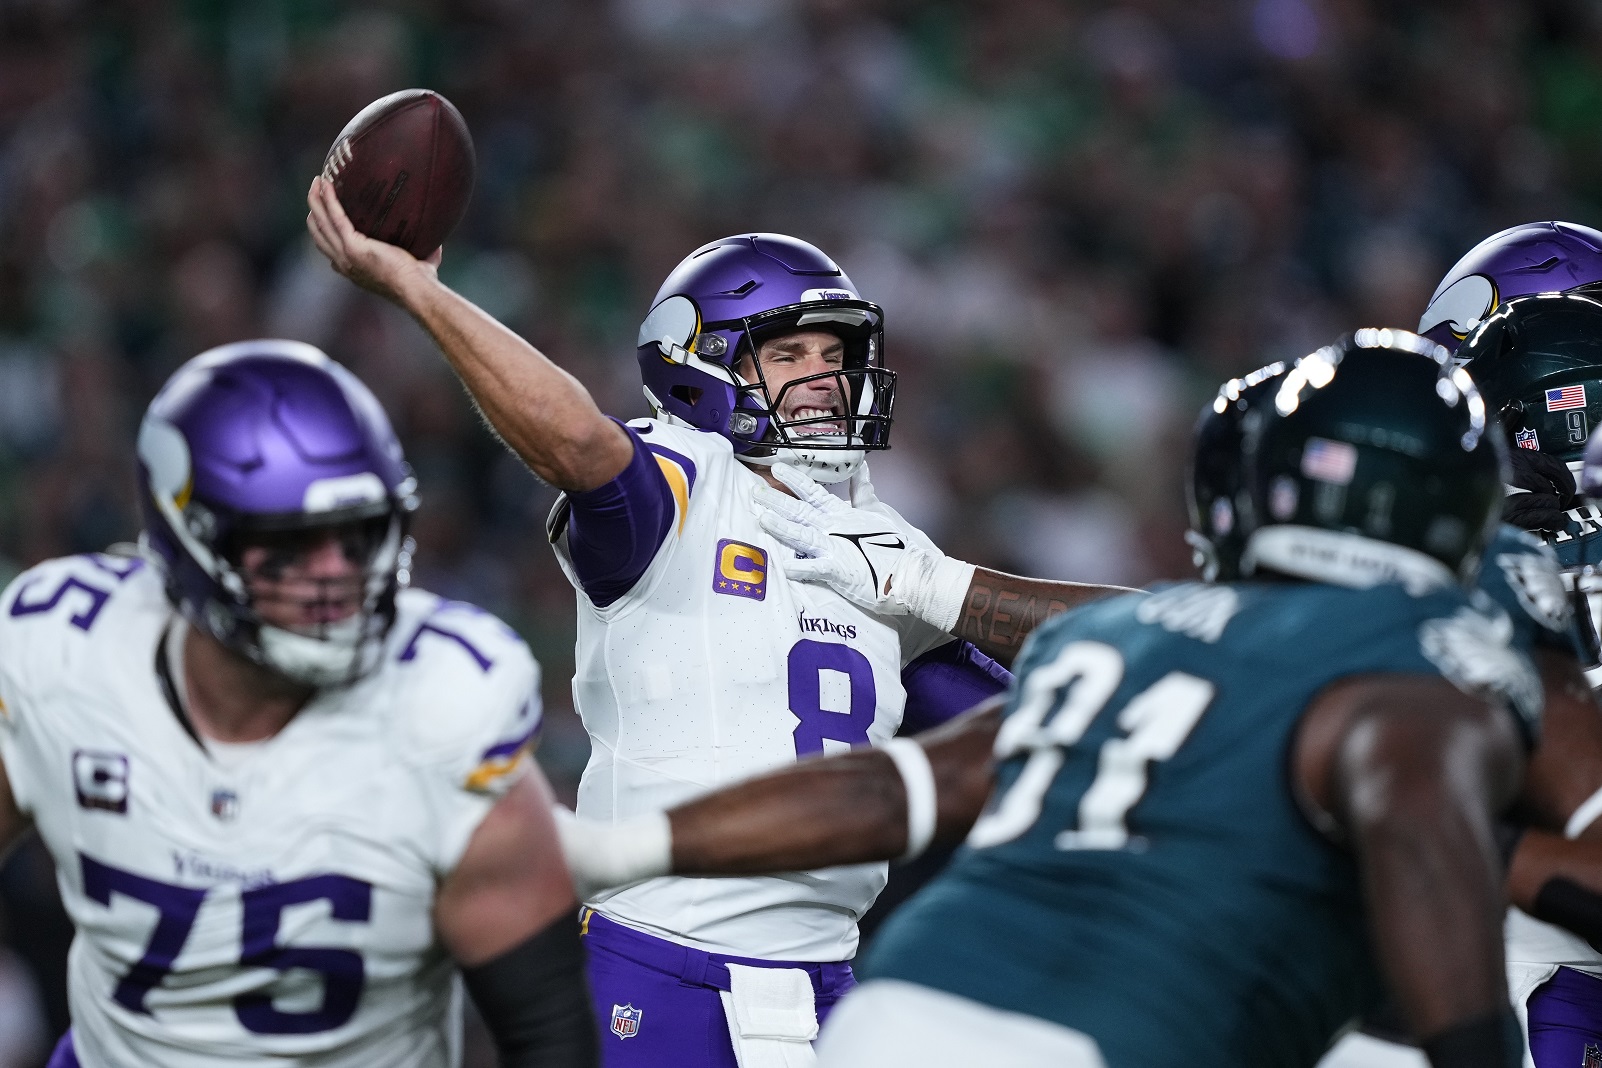 Swift, Smith combine for 306 yards, 2 TDs, as Eagles hold off fumble-prone Vikings